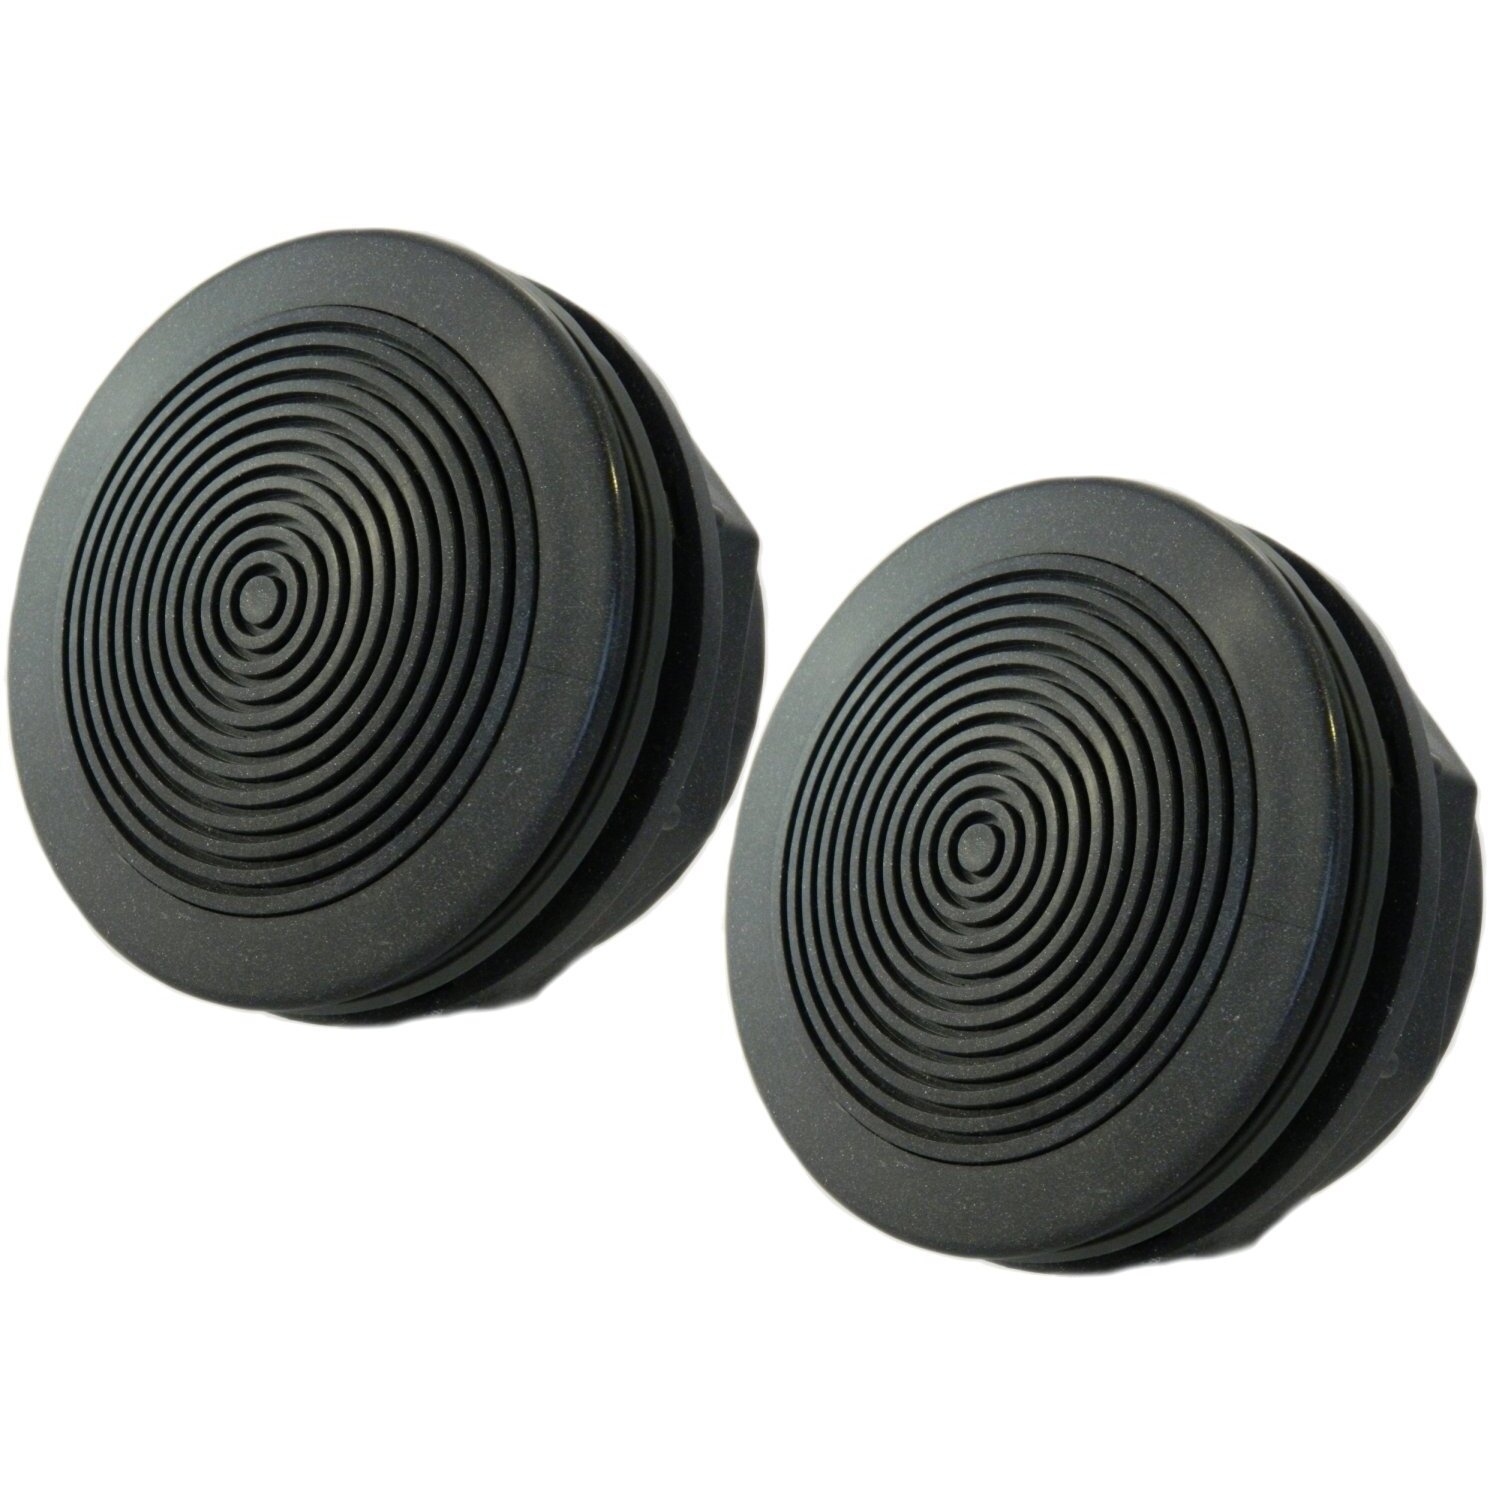 New PQN Audio SPA34-4GFCX Graphite Gray 3" 4 Ohm Low Profile Coaxial Waterproof Rear Nut Speakers